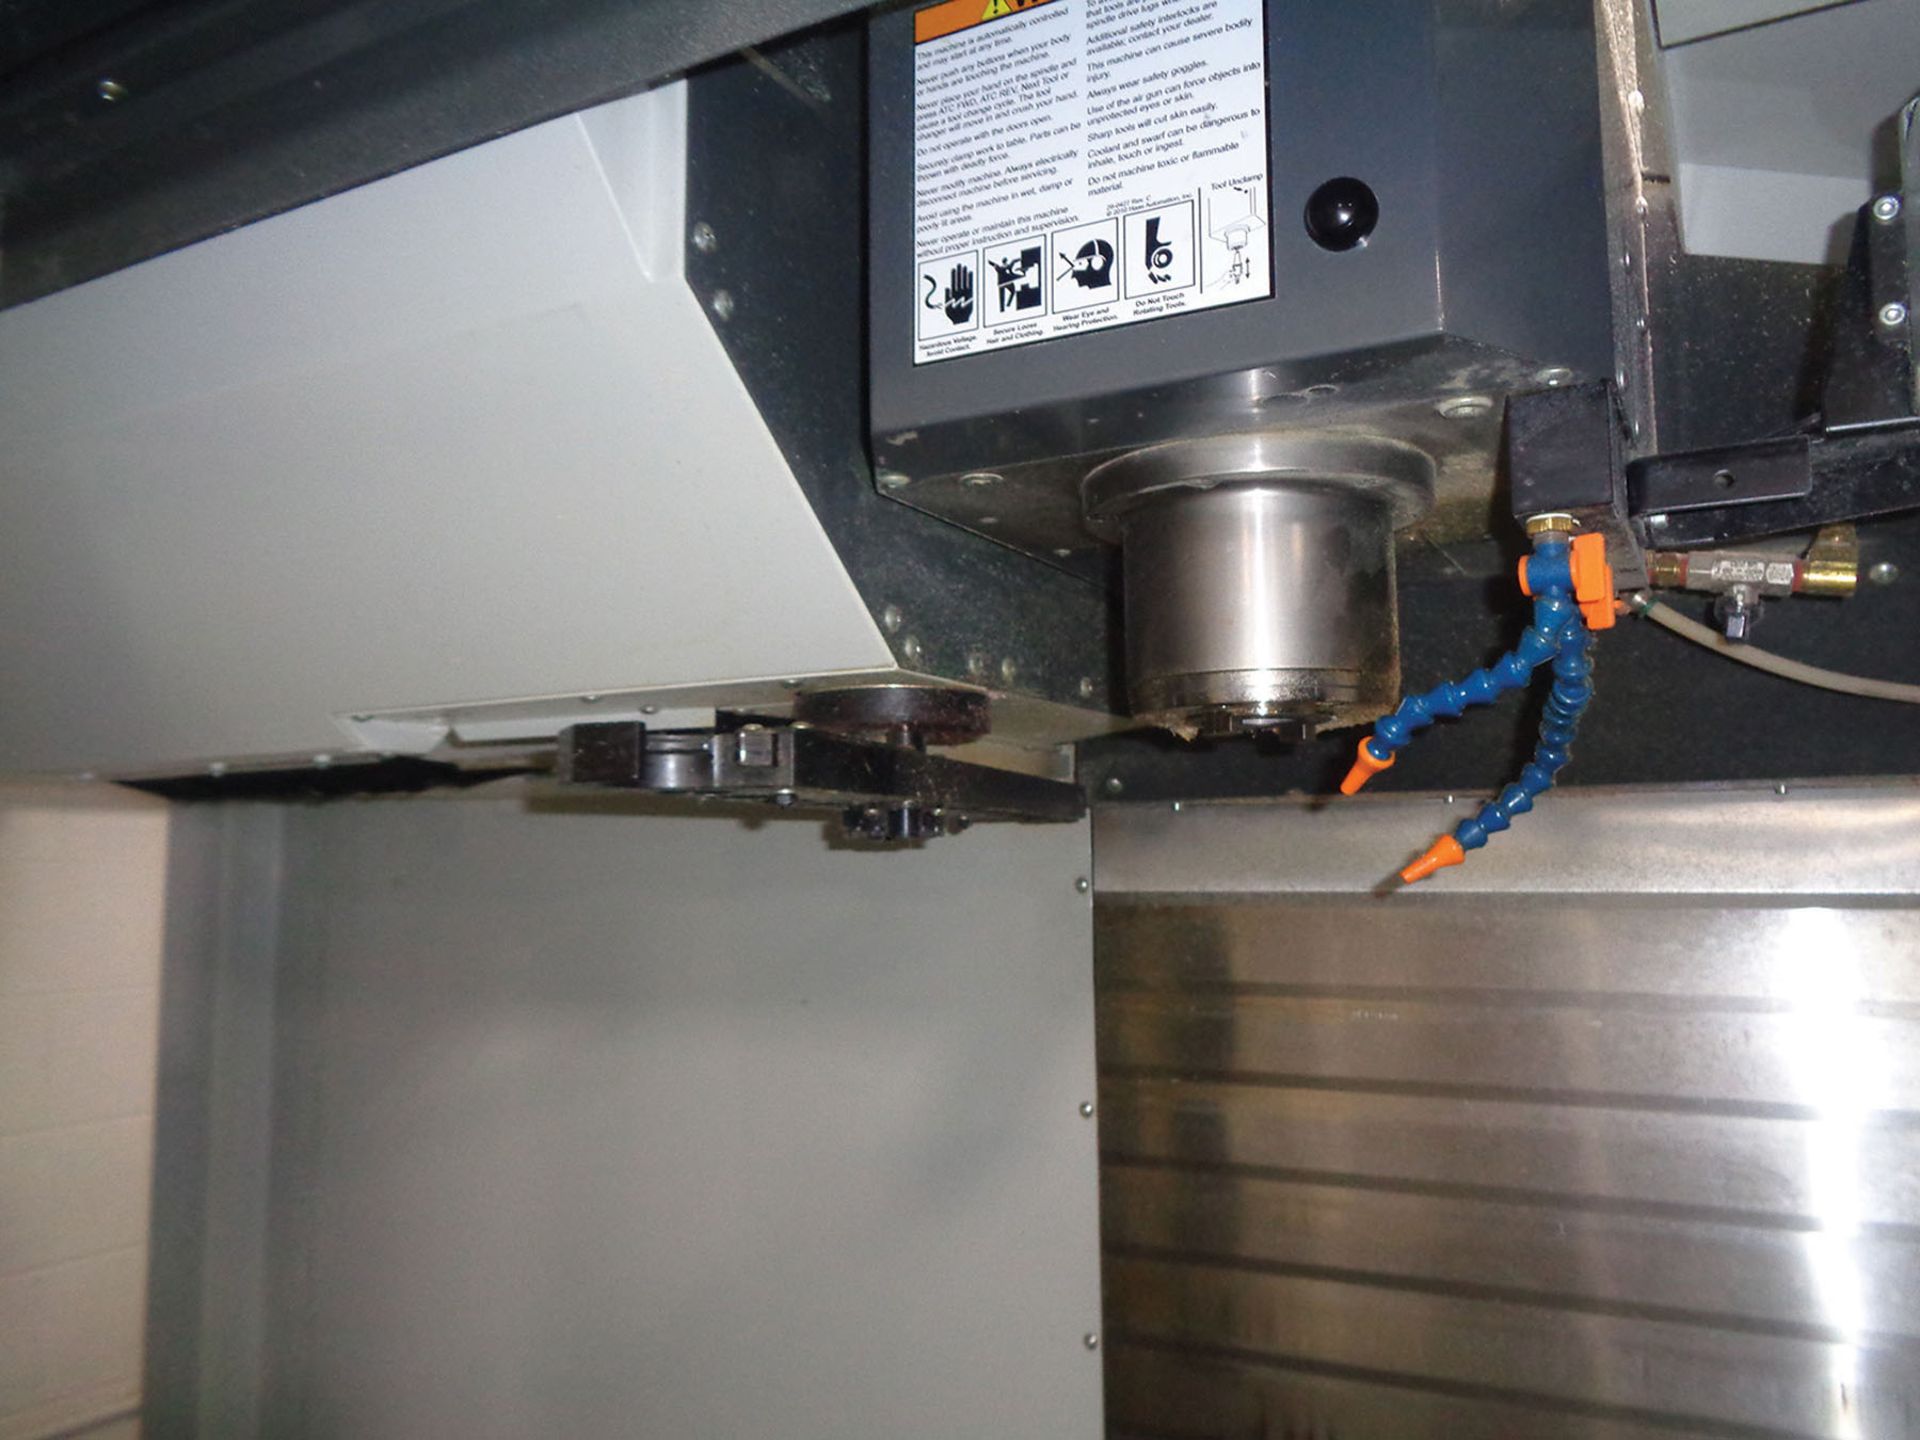 2013 HAAS VF-3 CNC VMC; S/N 1107955, TRAVELS X-40'', Y-20'', Z-25'', 24-TOOL SIDE MOUNTED ATC, 15, - Image 2 of 5